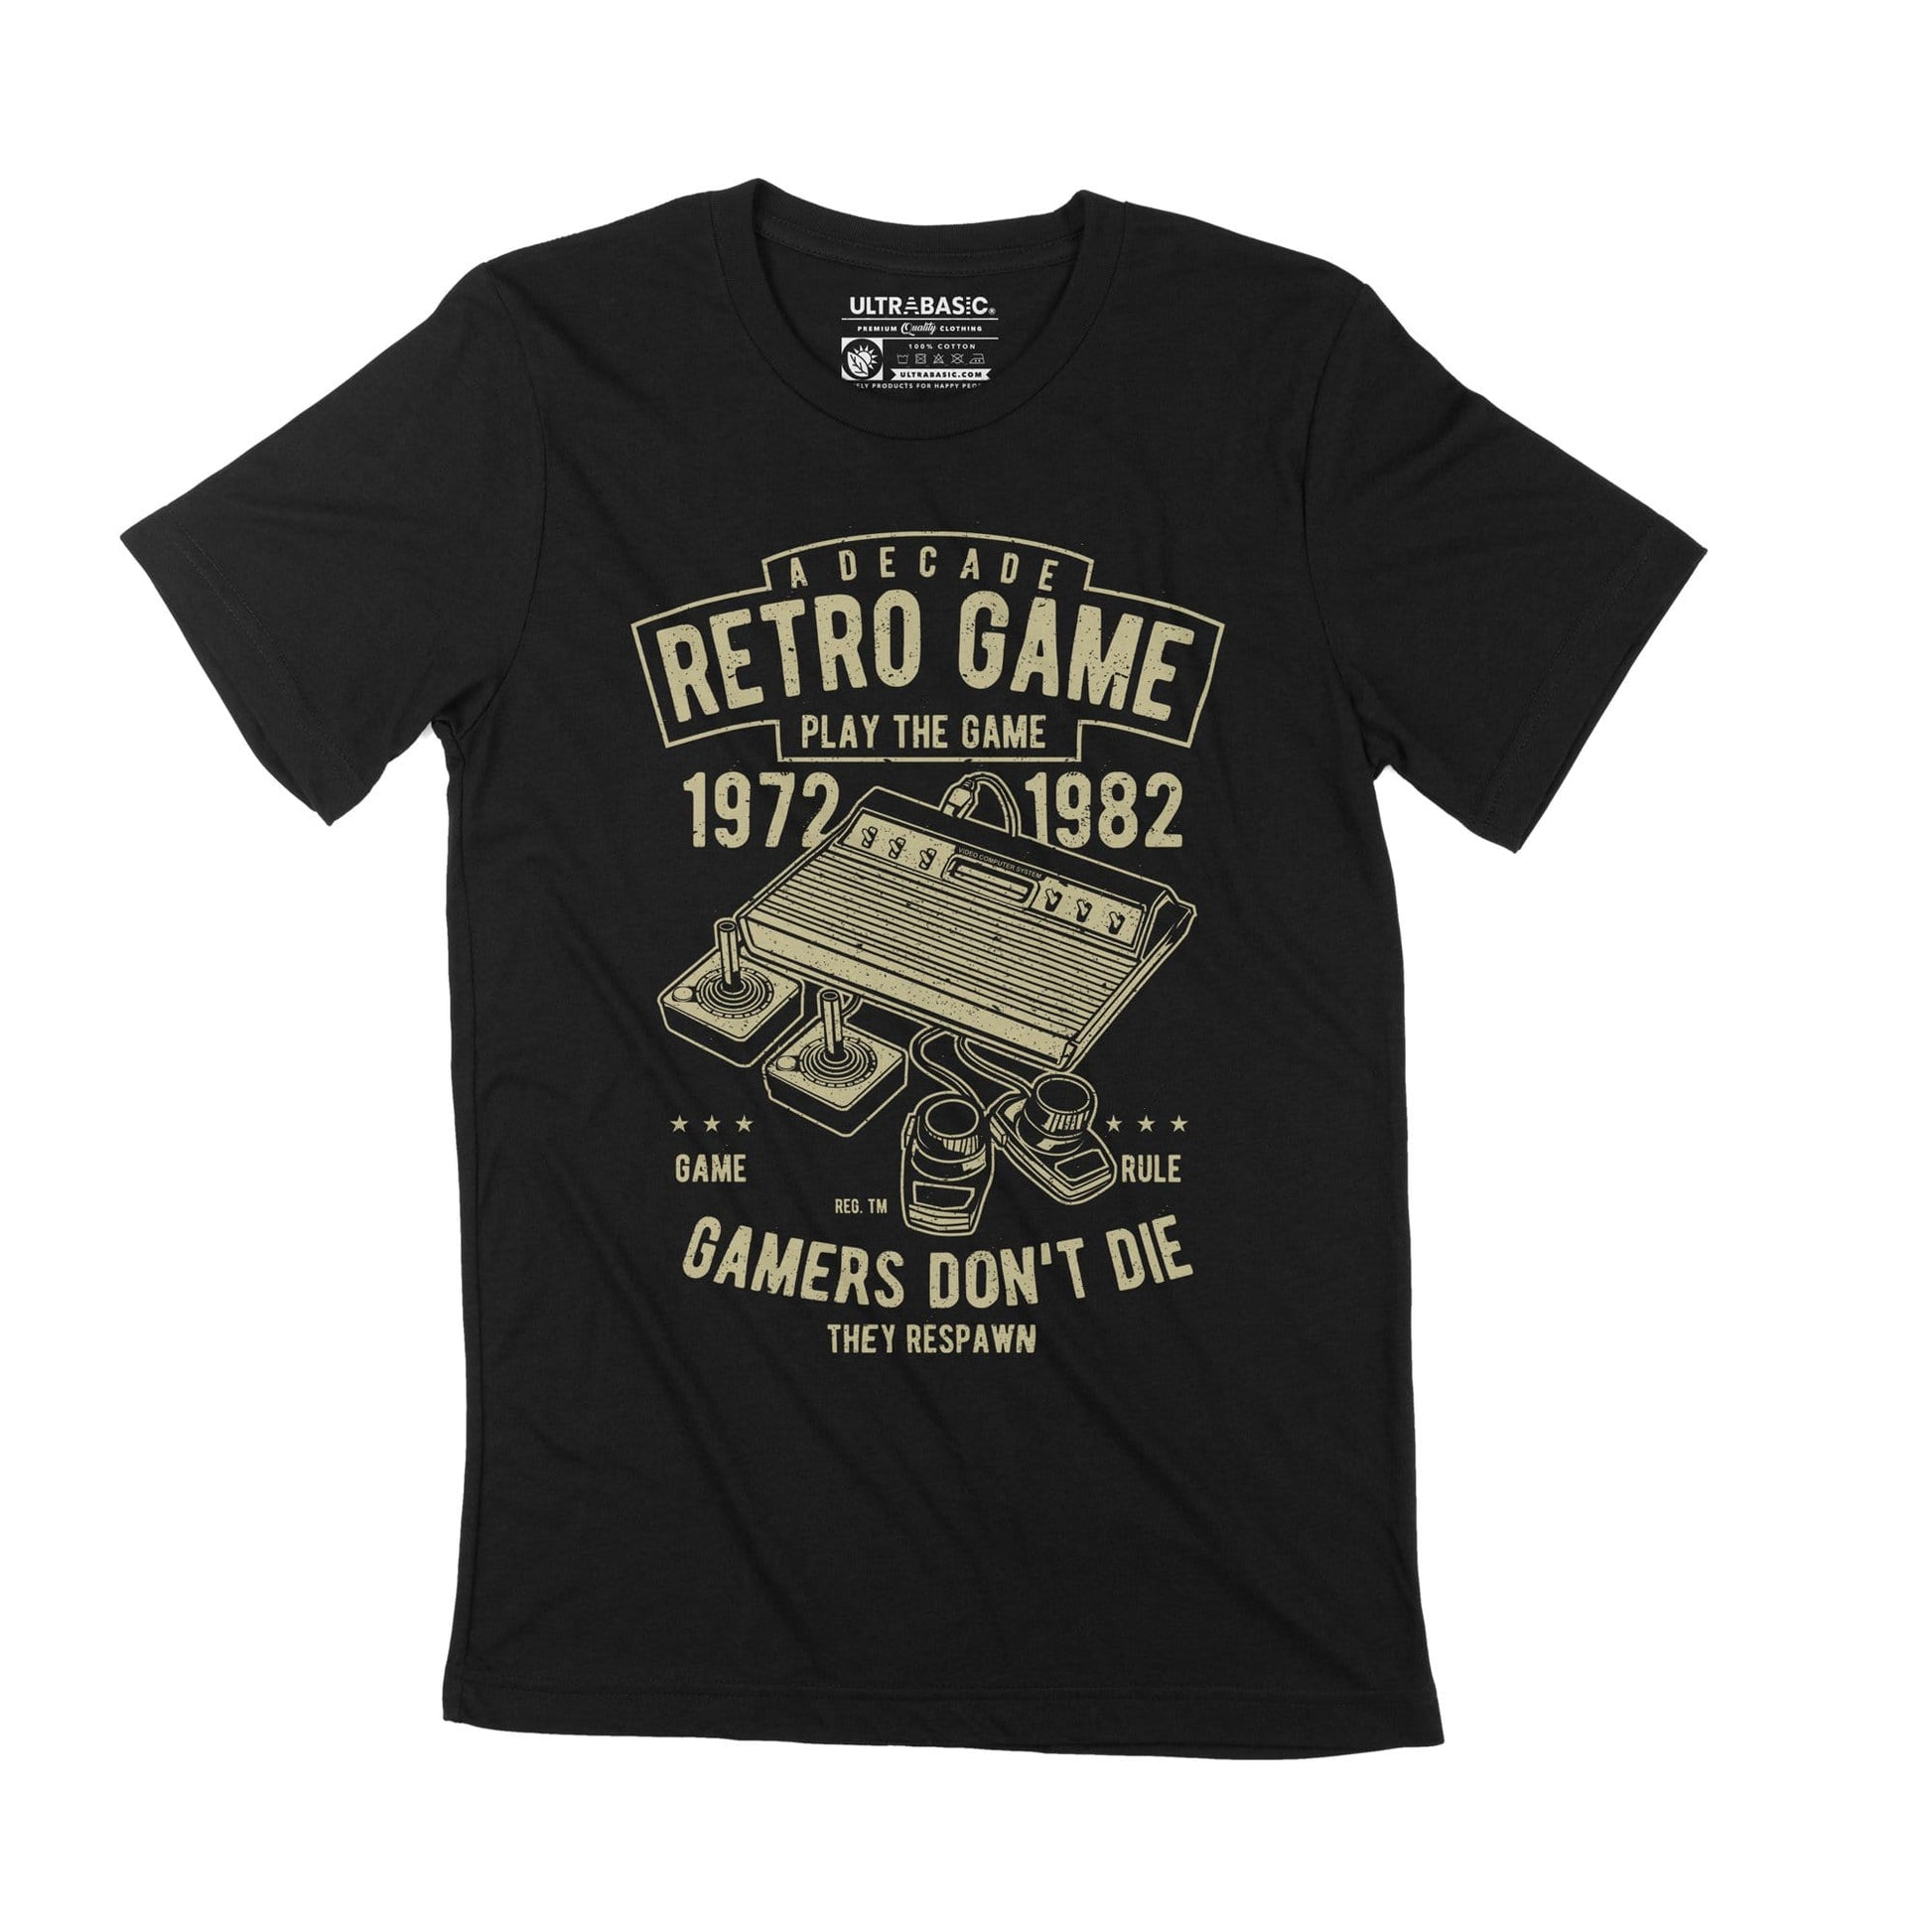 ULTRABASIC Retro Video Games Men's T-Shirt - Vintage Graphic Gaming Tee 80s game shirts pacman novelty teenage boy ideas son funny shirts youth tees christmas present never forget clothing cool hacking sarcastic adulting adult gifts for pc gamers merchandise nerds geeky slogan printed merch apparel love cool style